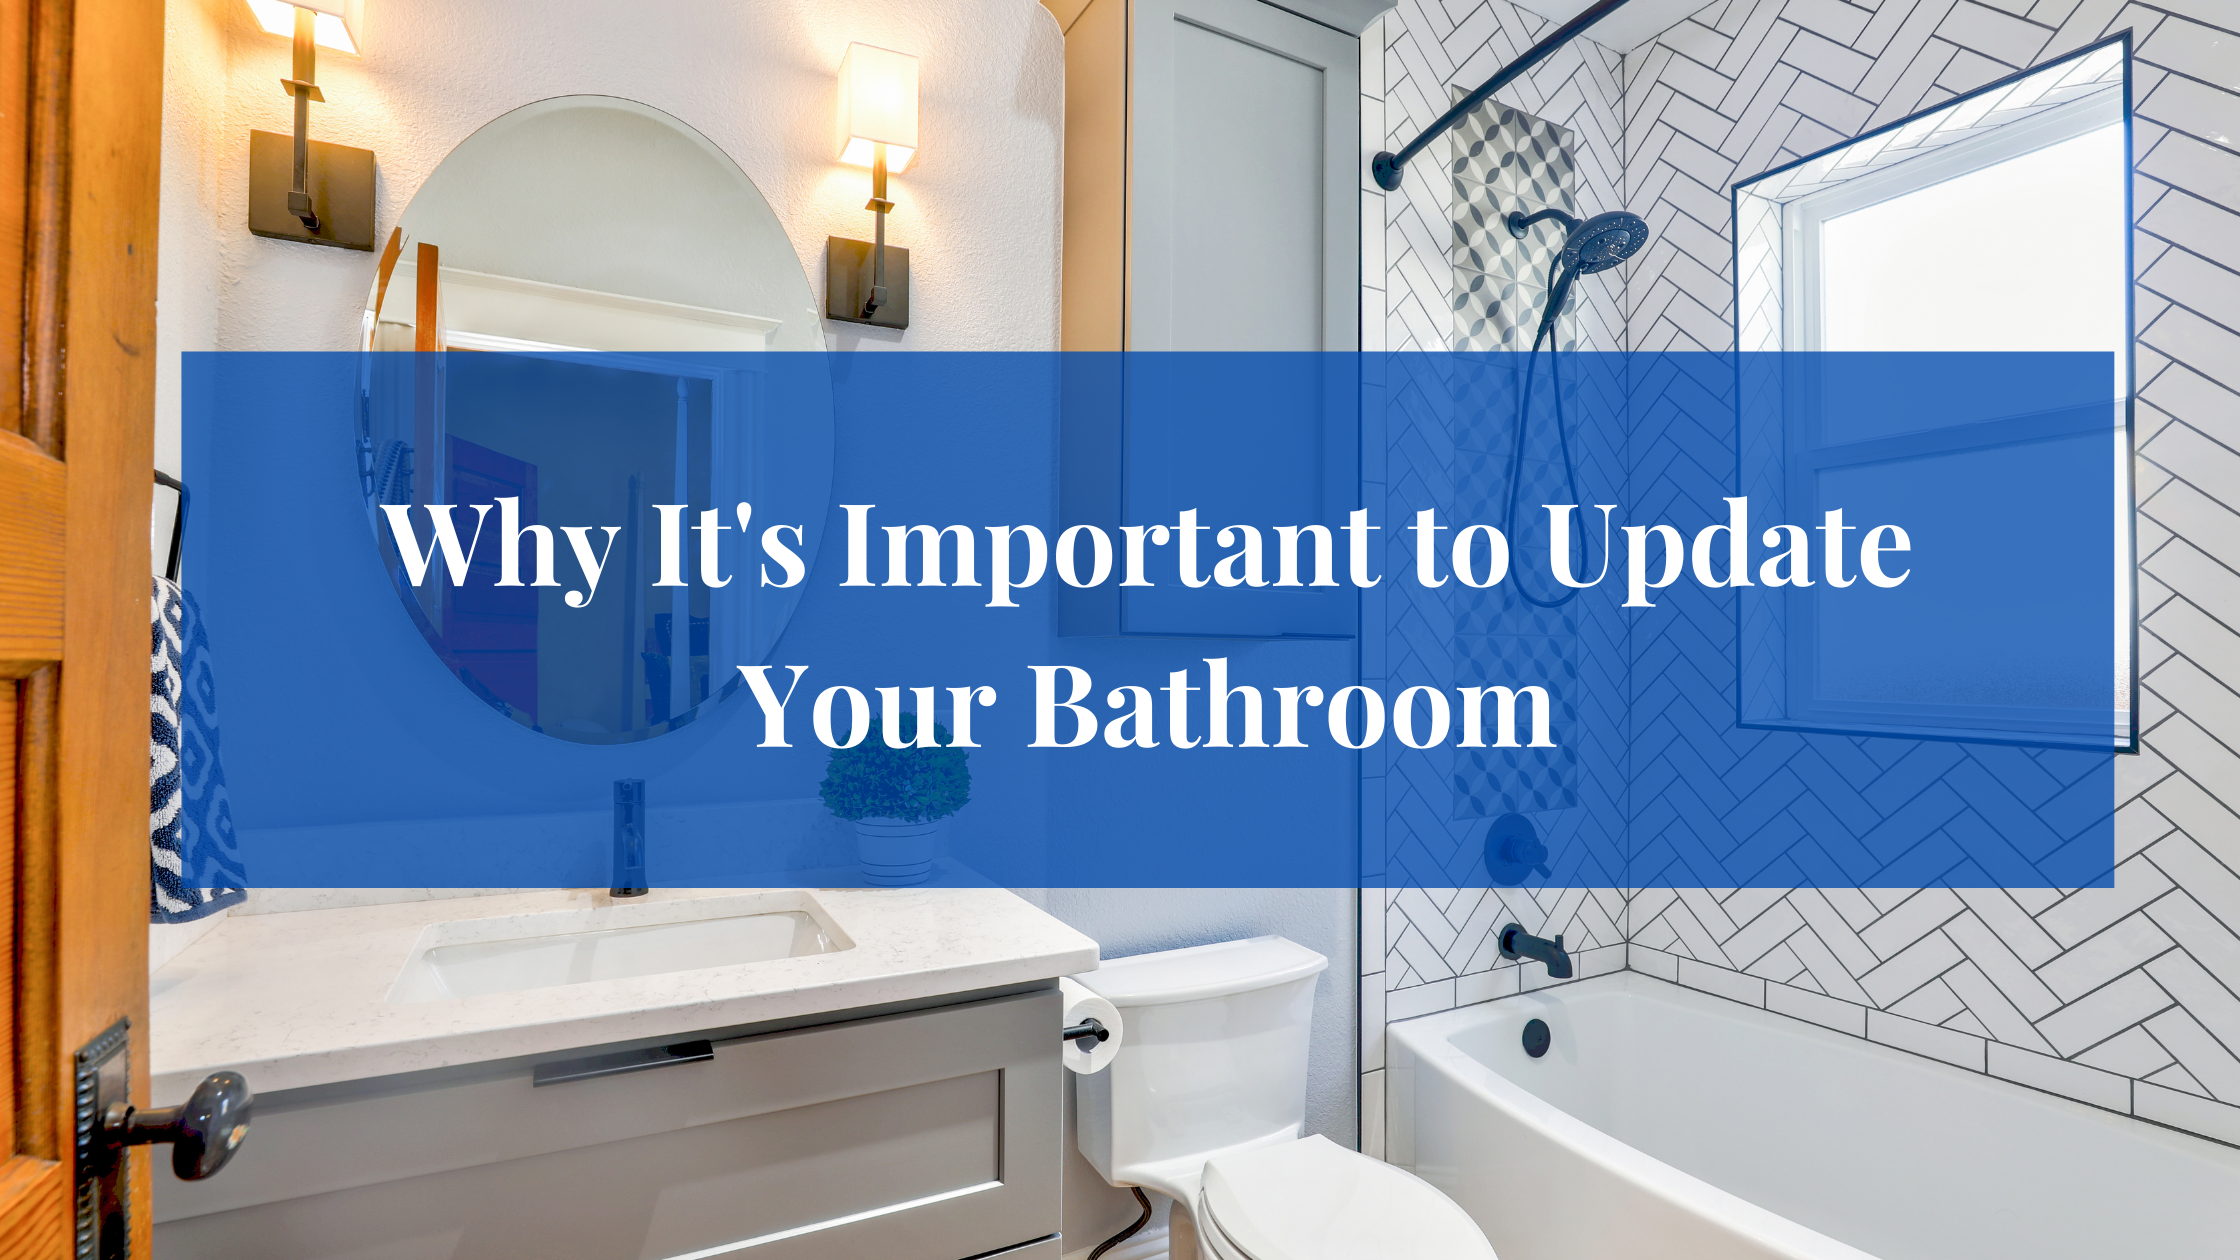 https://handymanconnection.com/wp-content/uploads/2021/05/Why-Its-Important-to-Update-Your-Bathroom.png